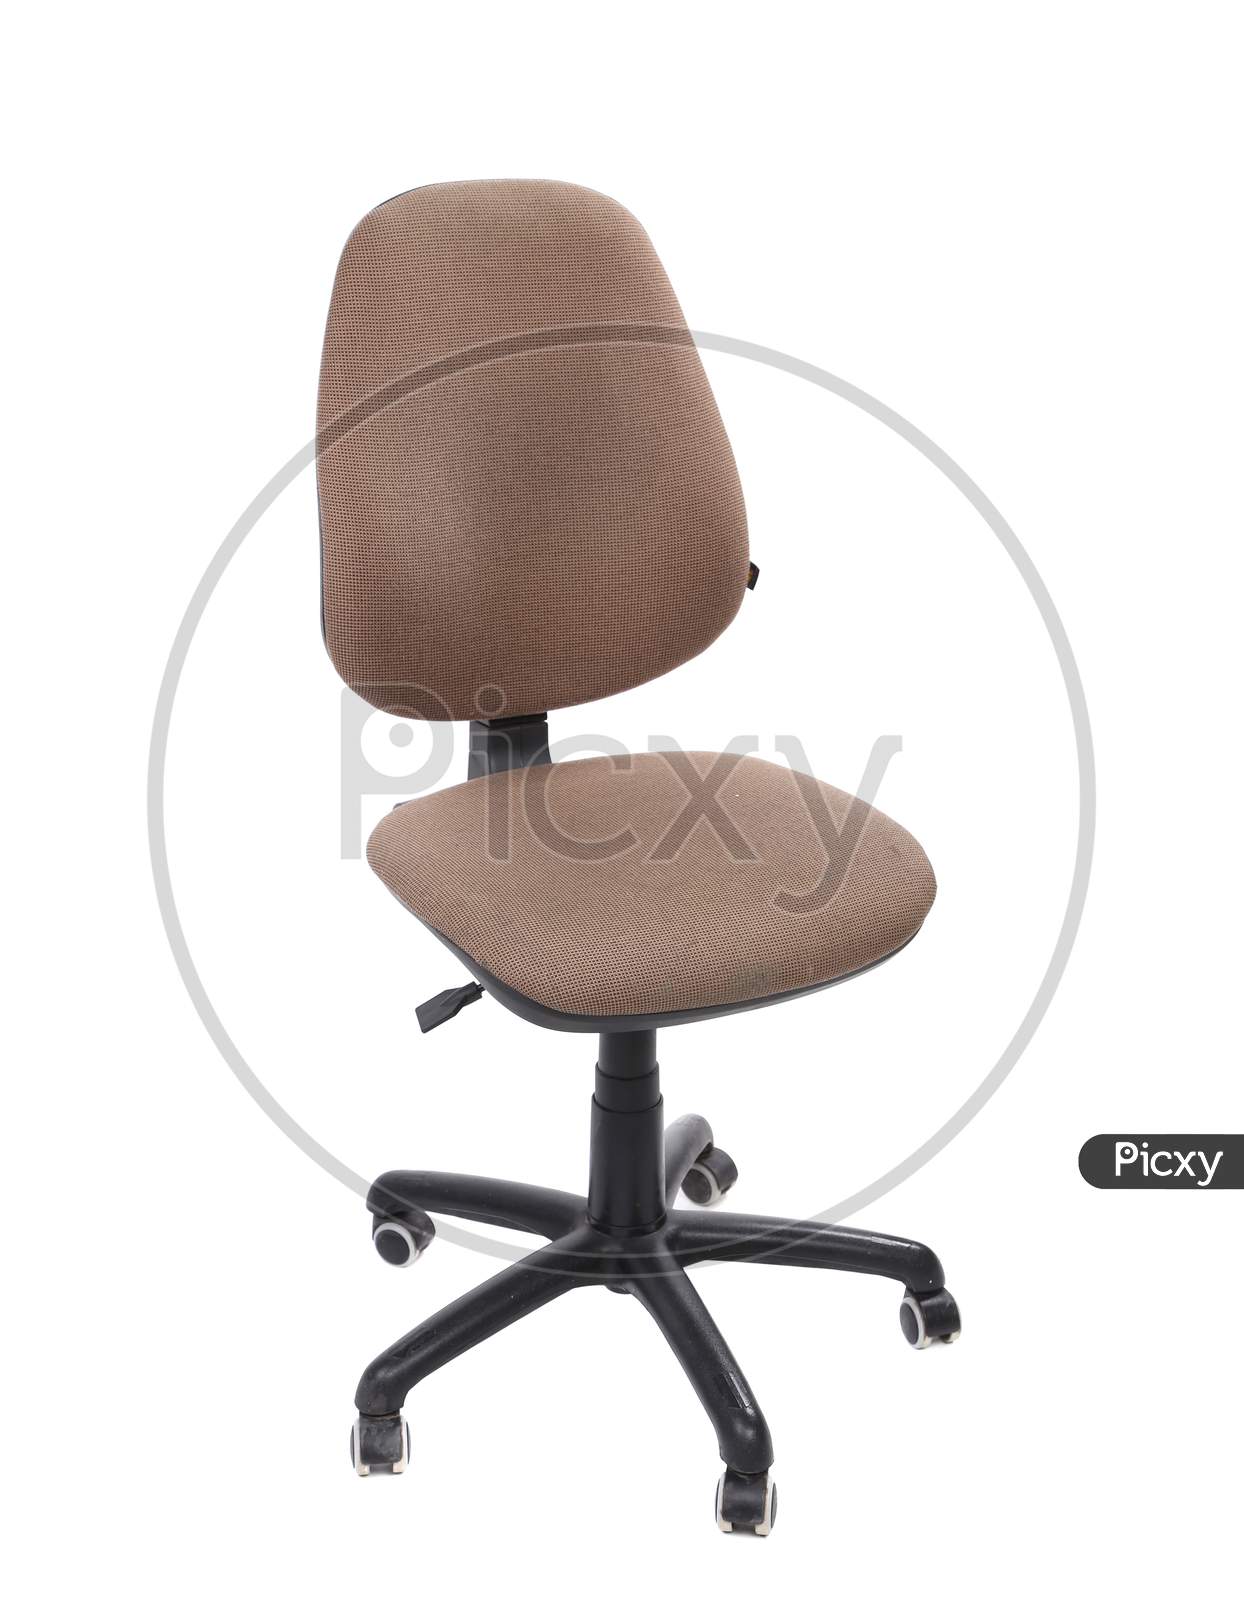 Beige Color Office Chair. Isolated On A White Background.